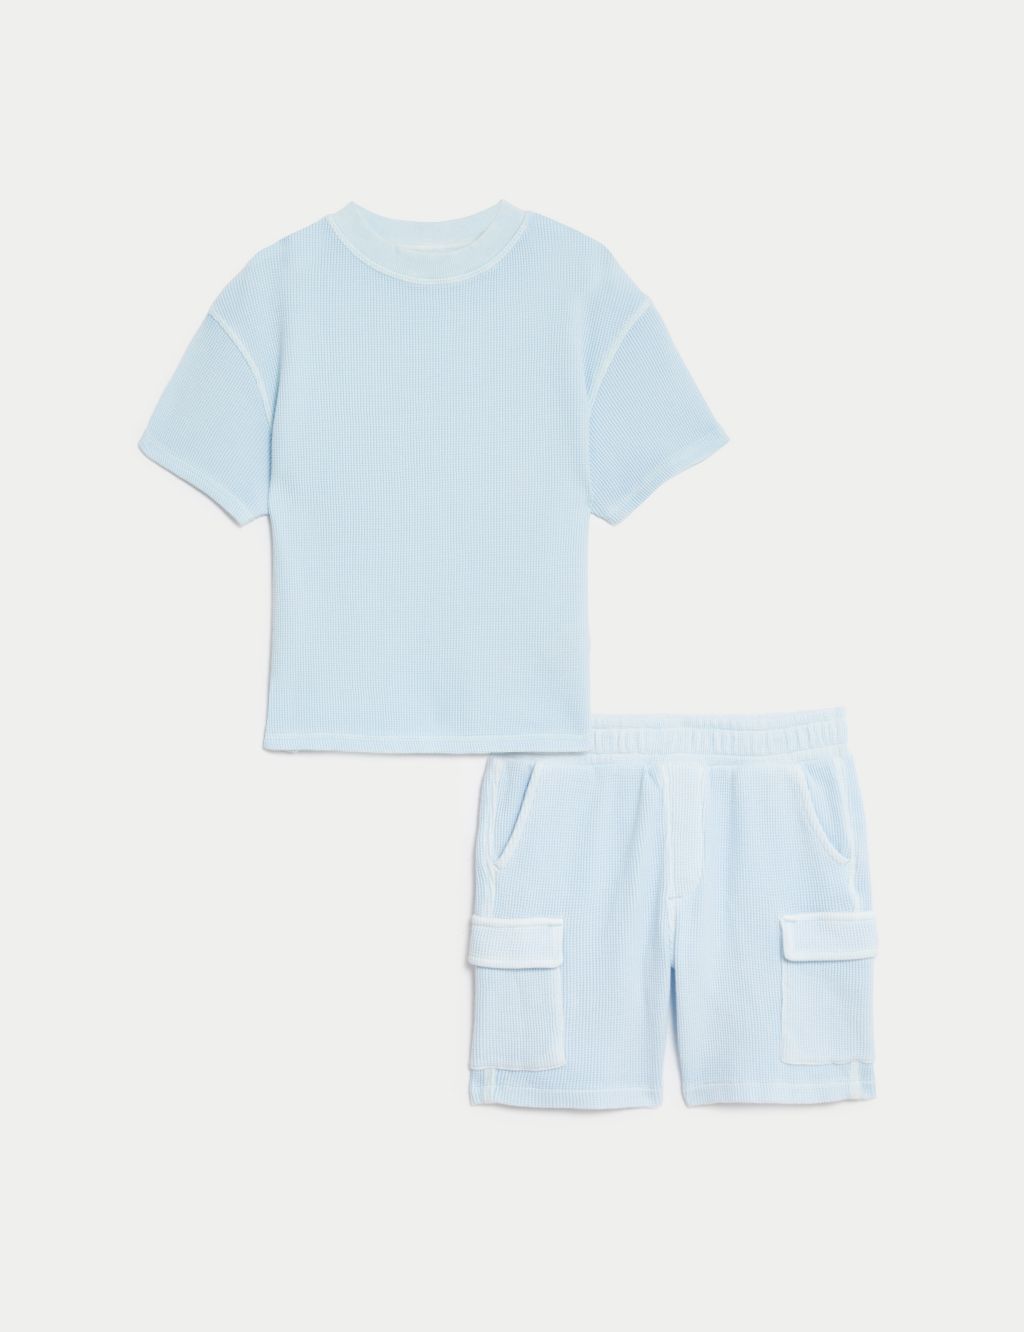 Pure Cotton Top & Bottom Outfit (2-8 Yrs)